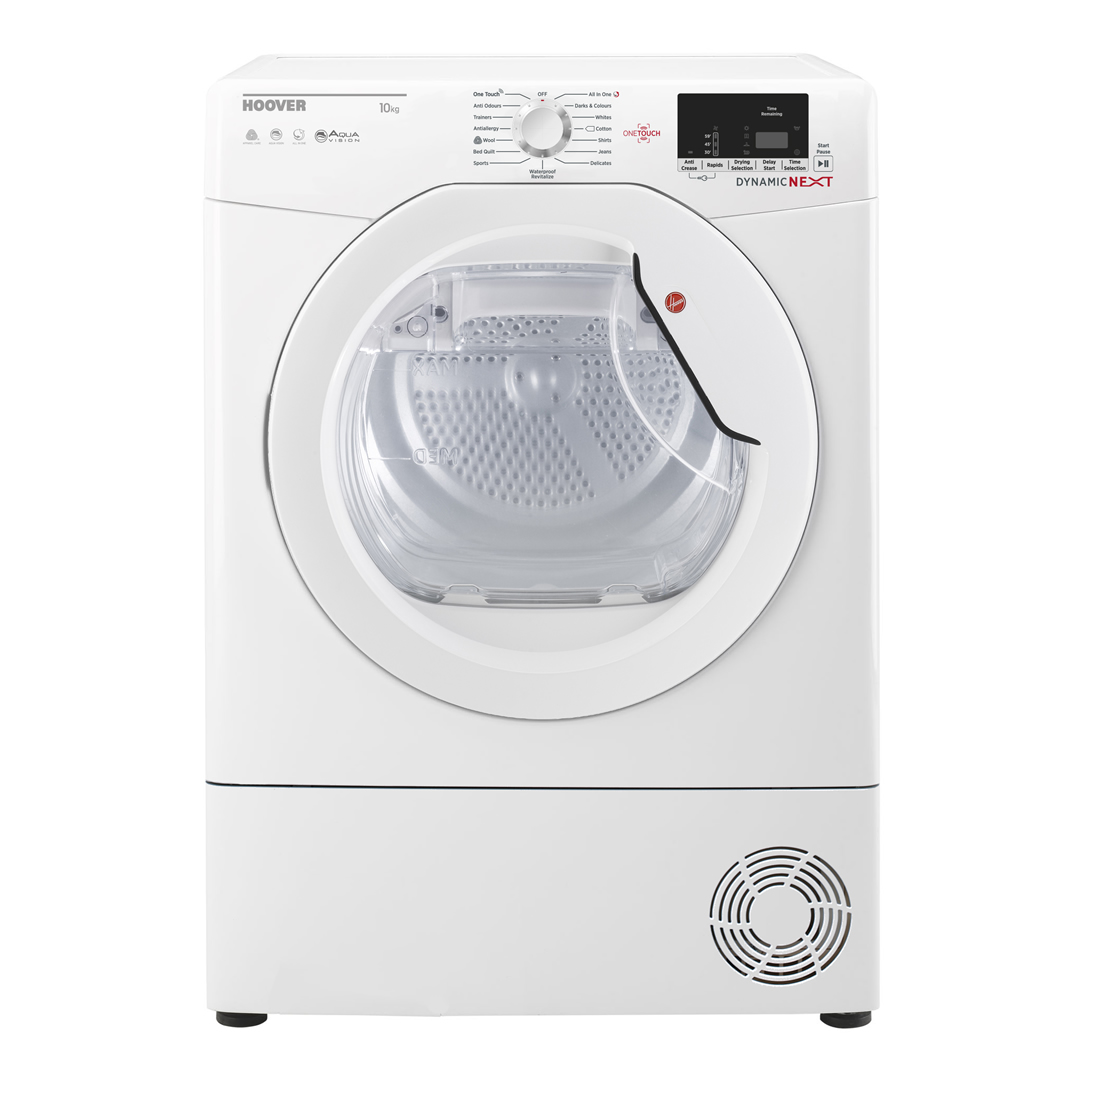 Hoover 10kg Load Condenser Tumble Dryer Class B White